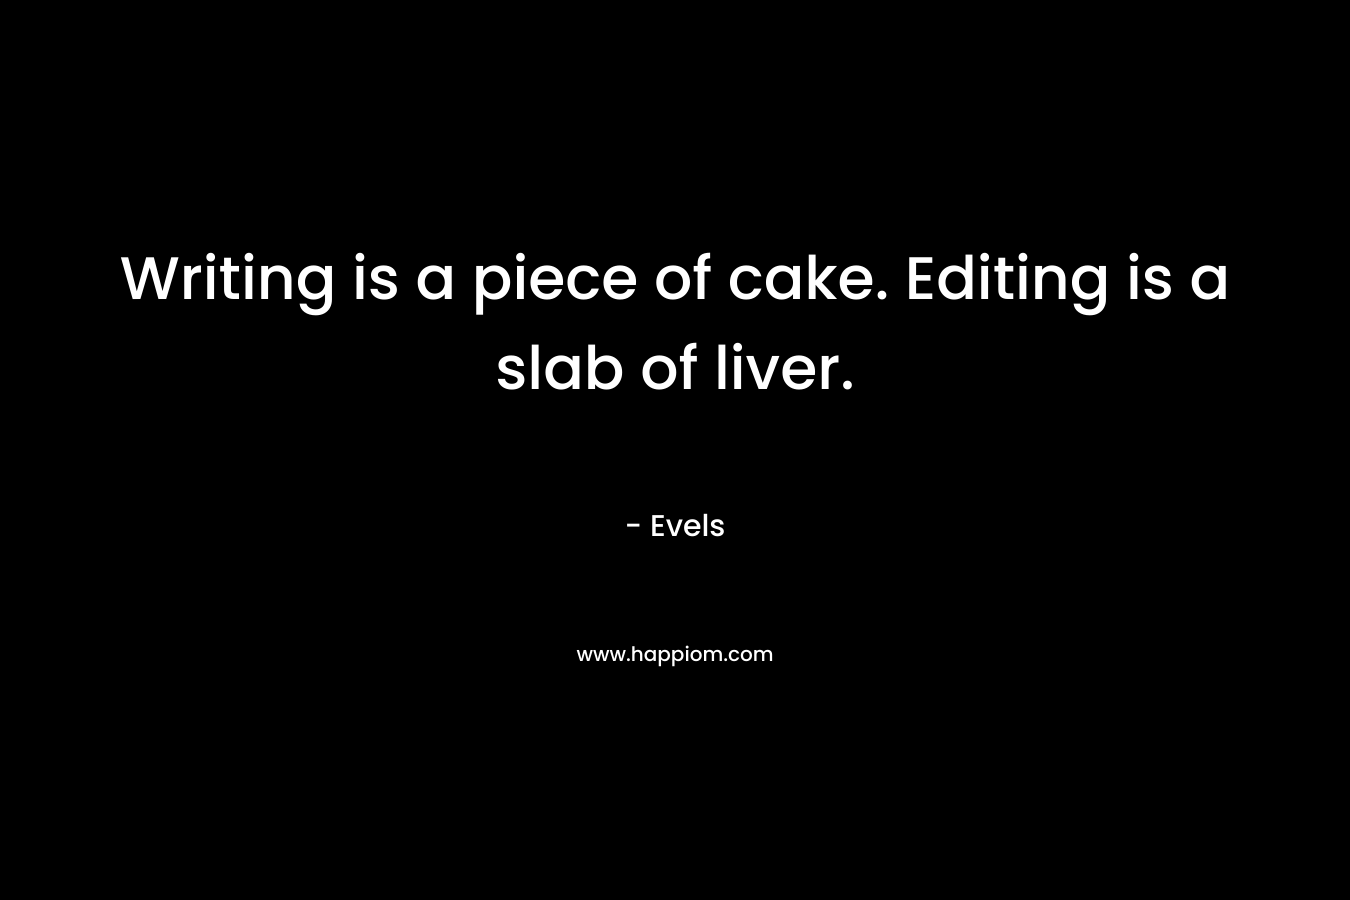 Writing is a piece of cake. Editing is a slab of liver.